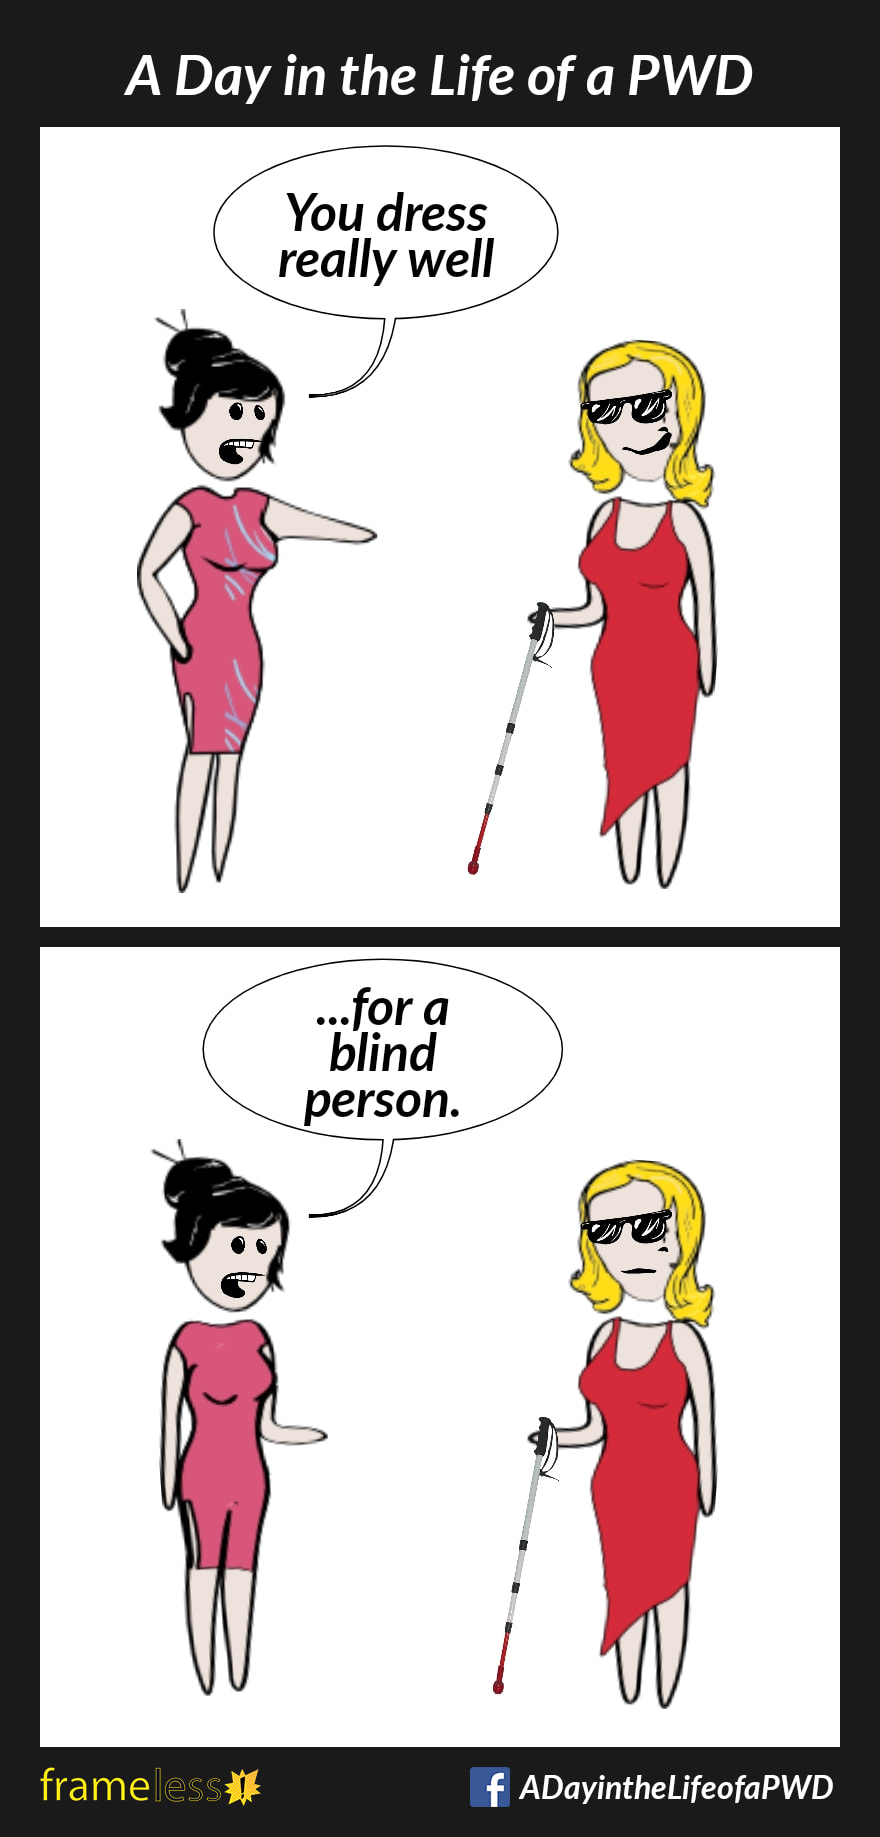 COMIC STRIP 
A Day in the Life of a PWD (Person With a Disability) 

Frame 1:
A woman wearing dark glasses and using a white cane is chatting with an acquaintance. 
ACQUAINTANCE: You dress really well
The woman smiles.

Frame 2:
ACQUAINTANCE: ...for a blind person.